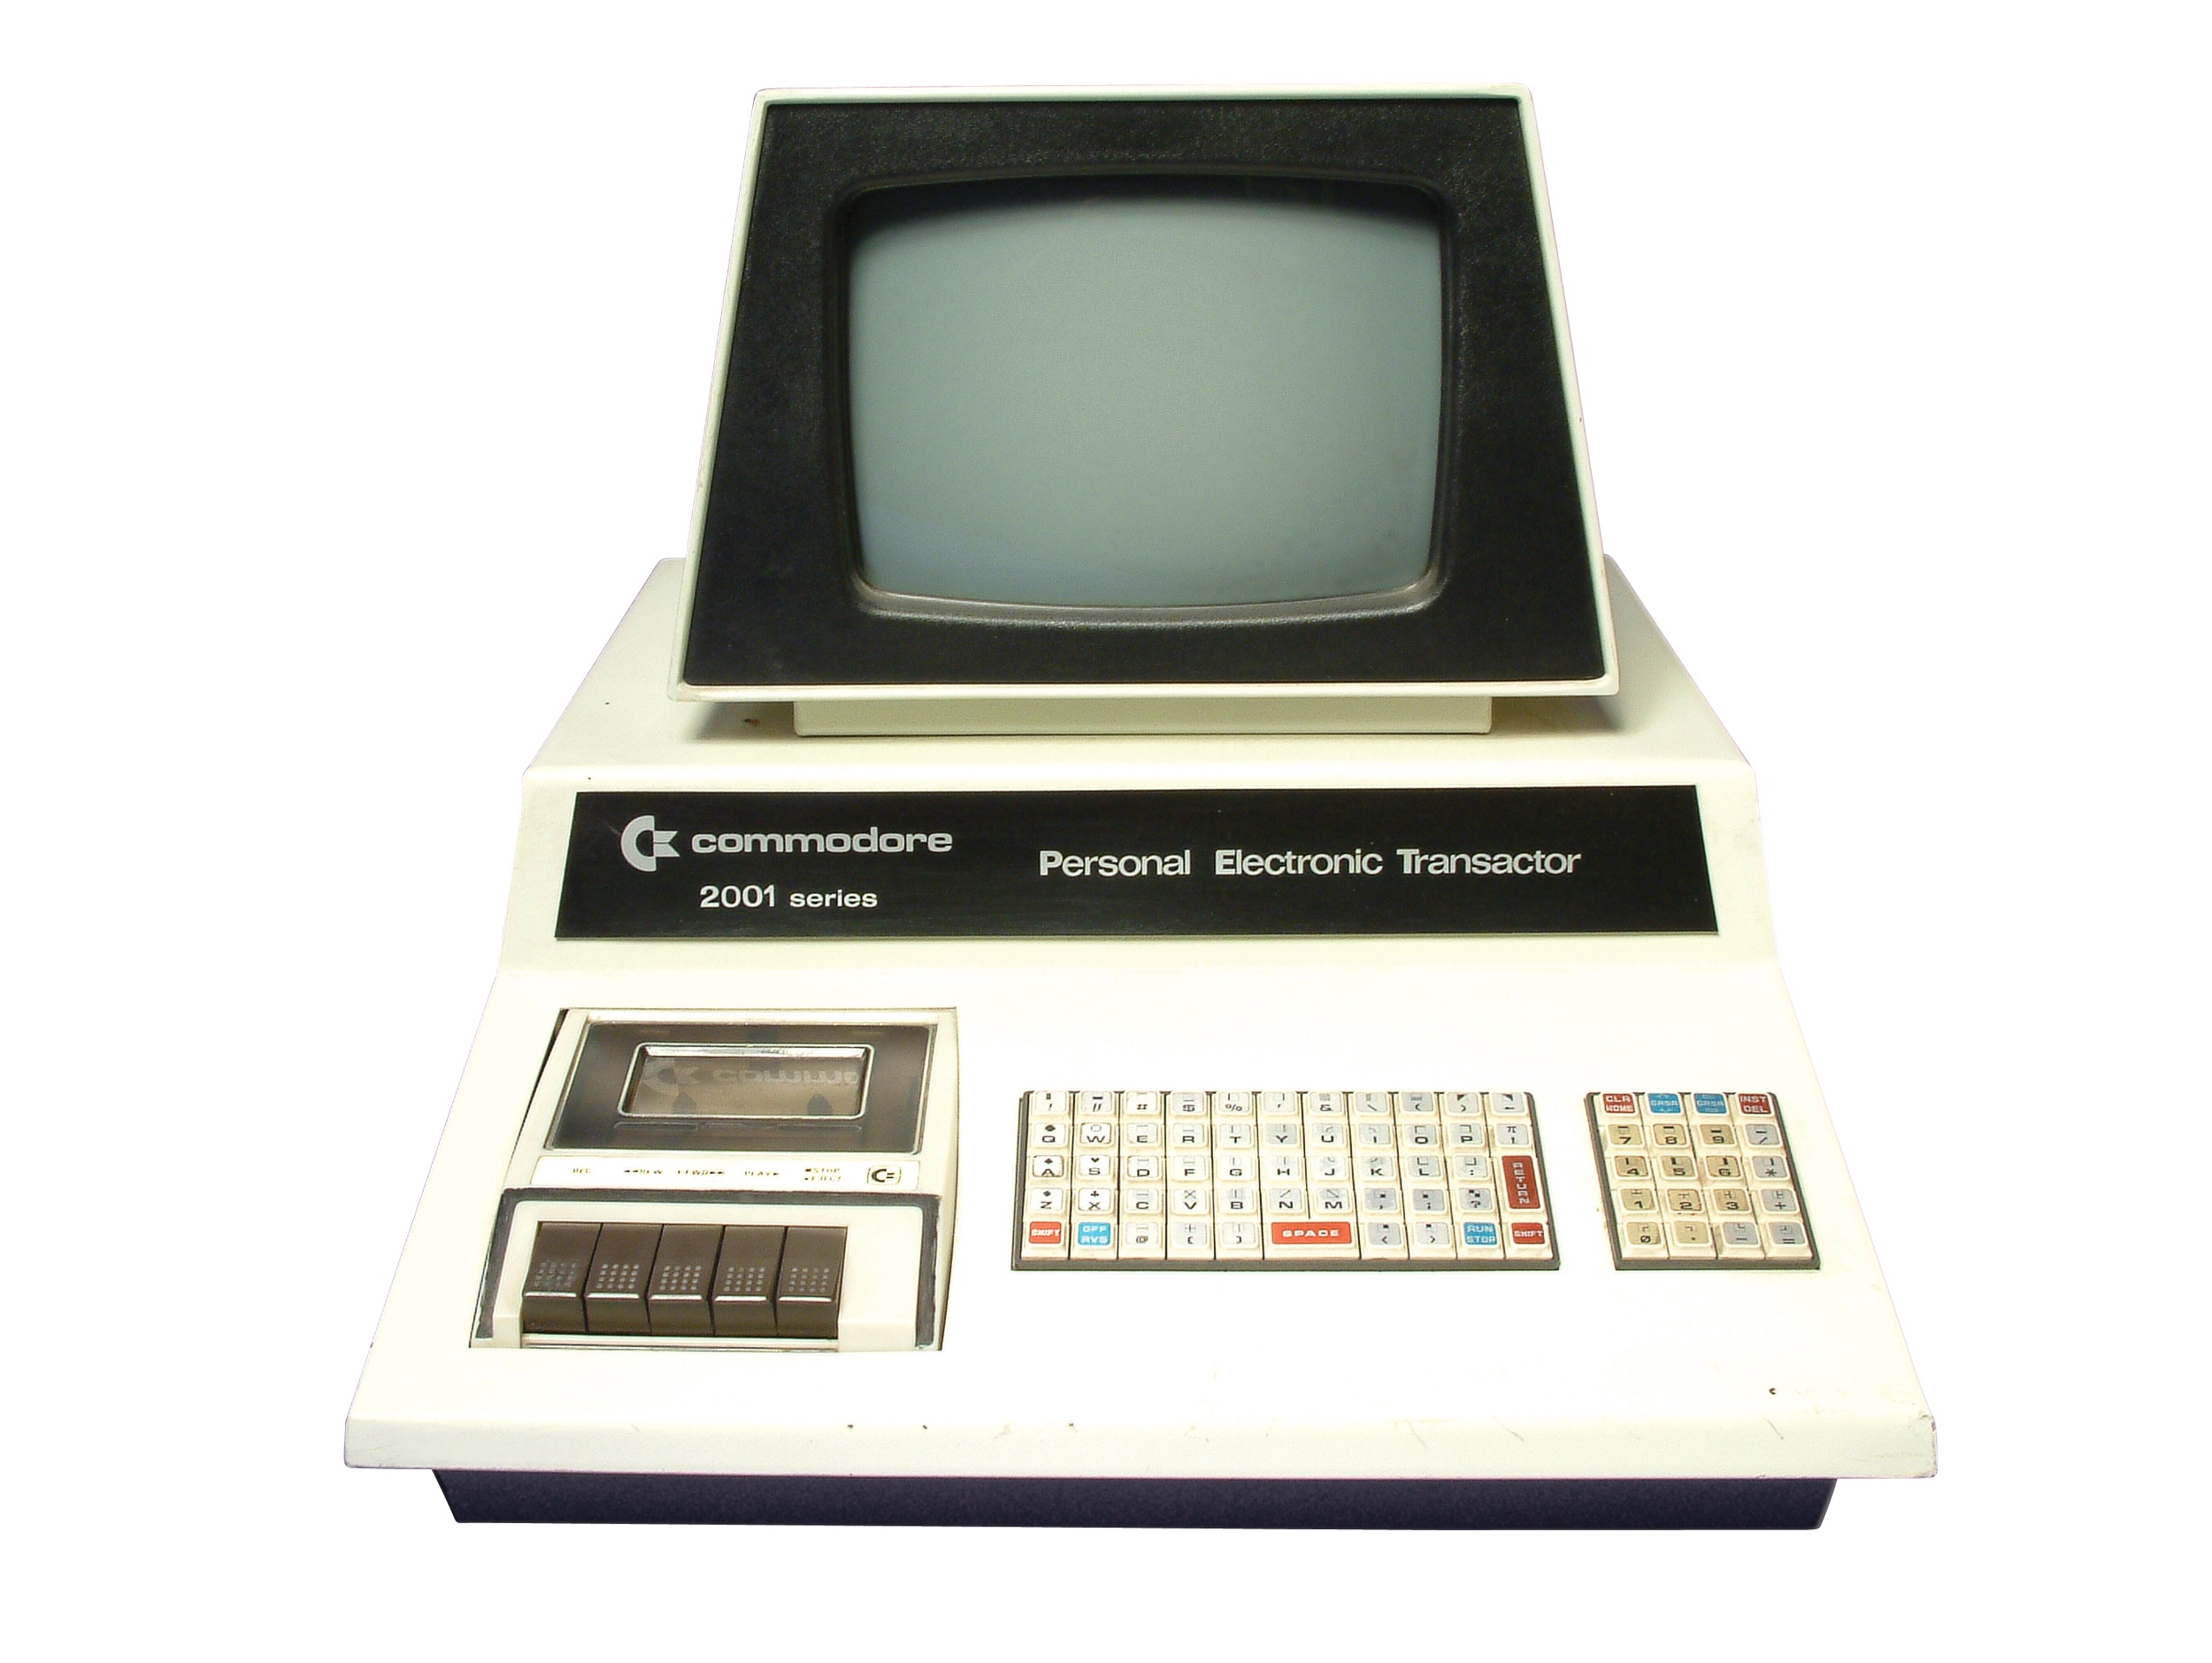 Commodore PET 2001 (Computerspielemuseum Berlin CC BY-SA)